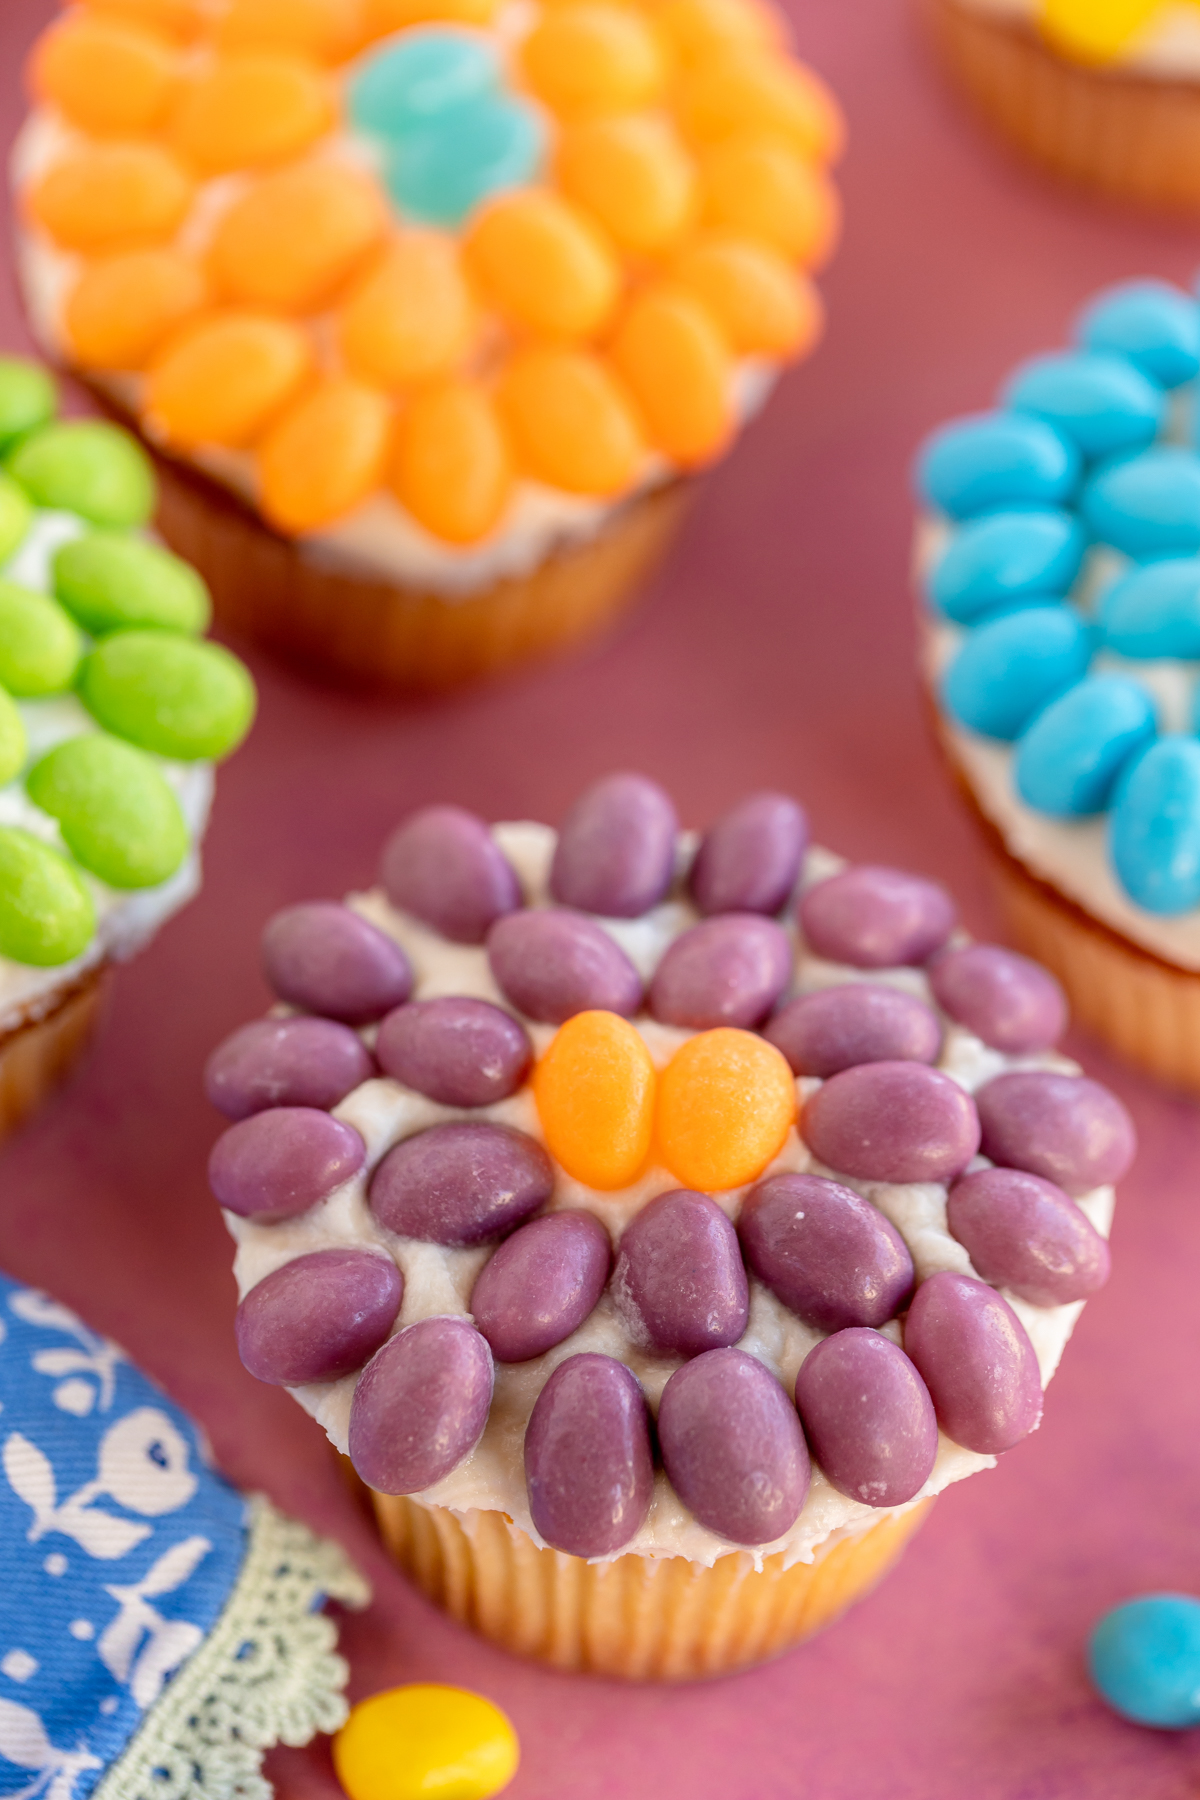 flower cupcakes with jelly beans